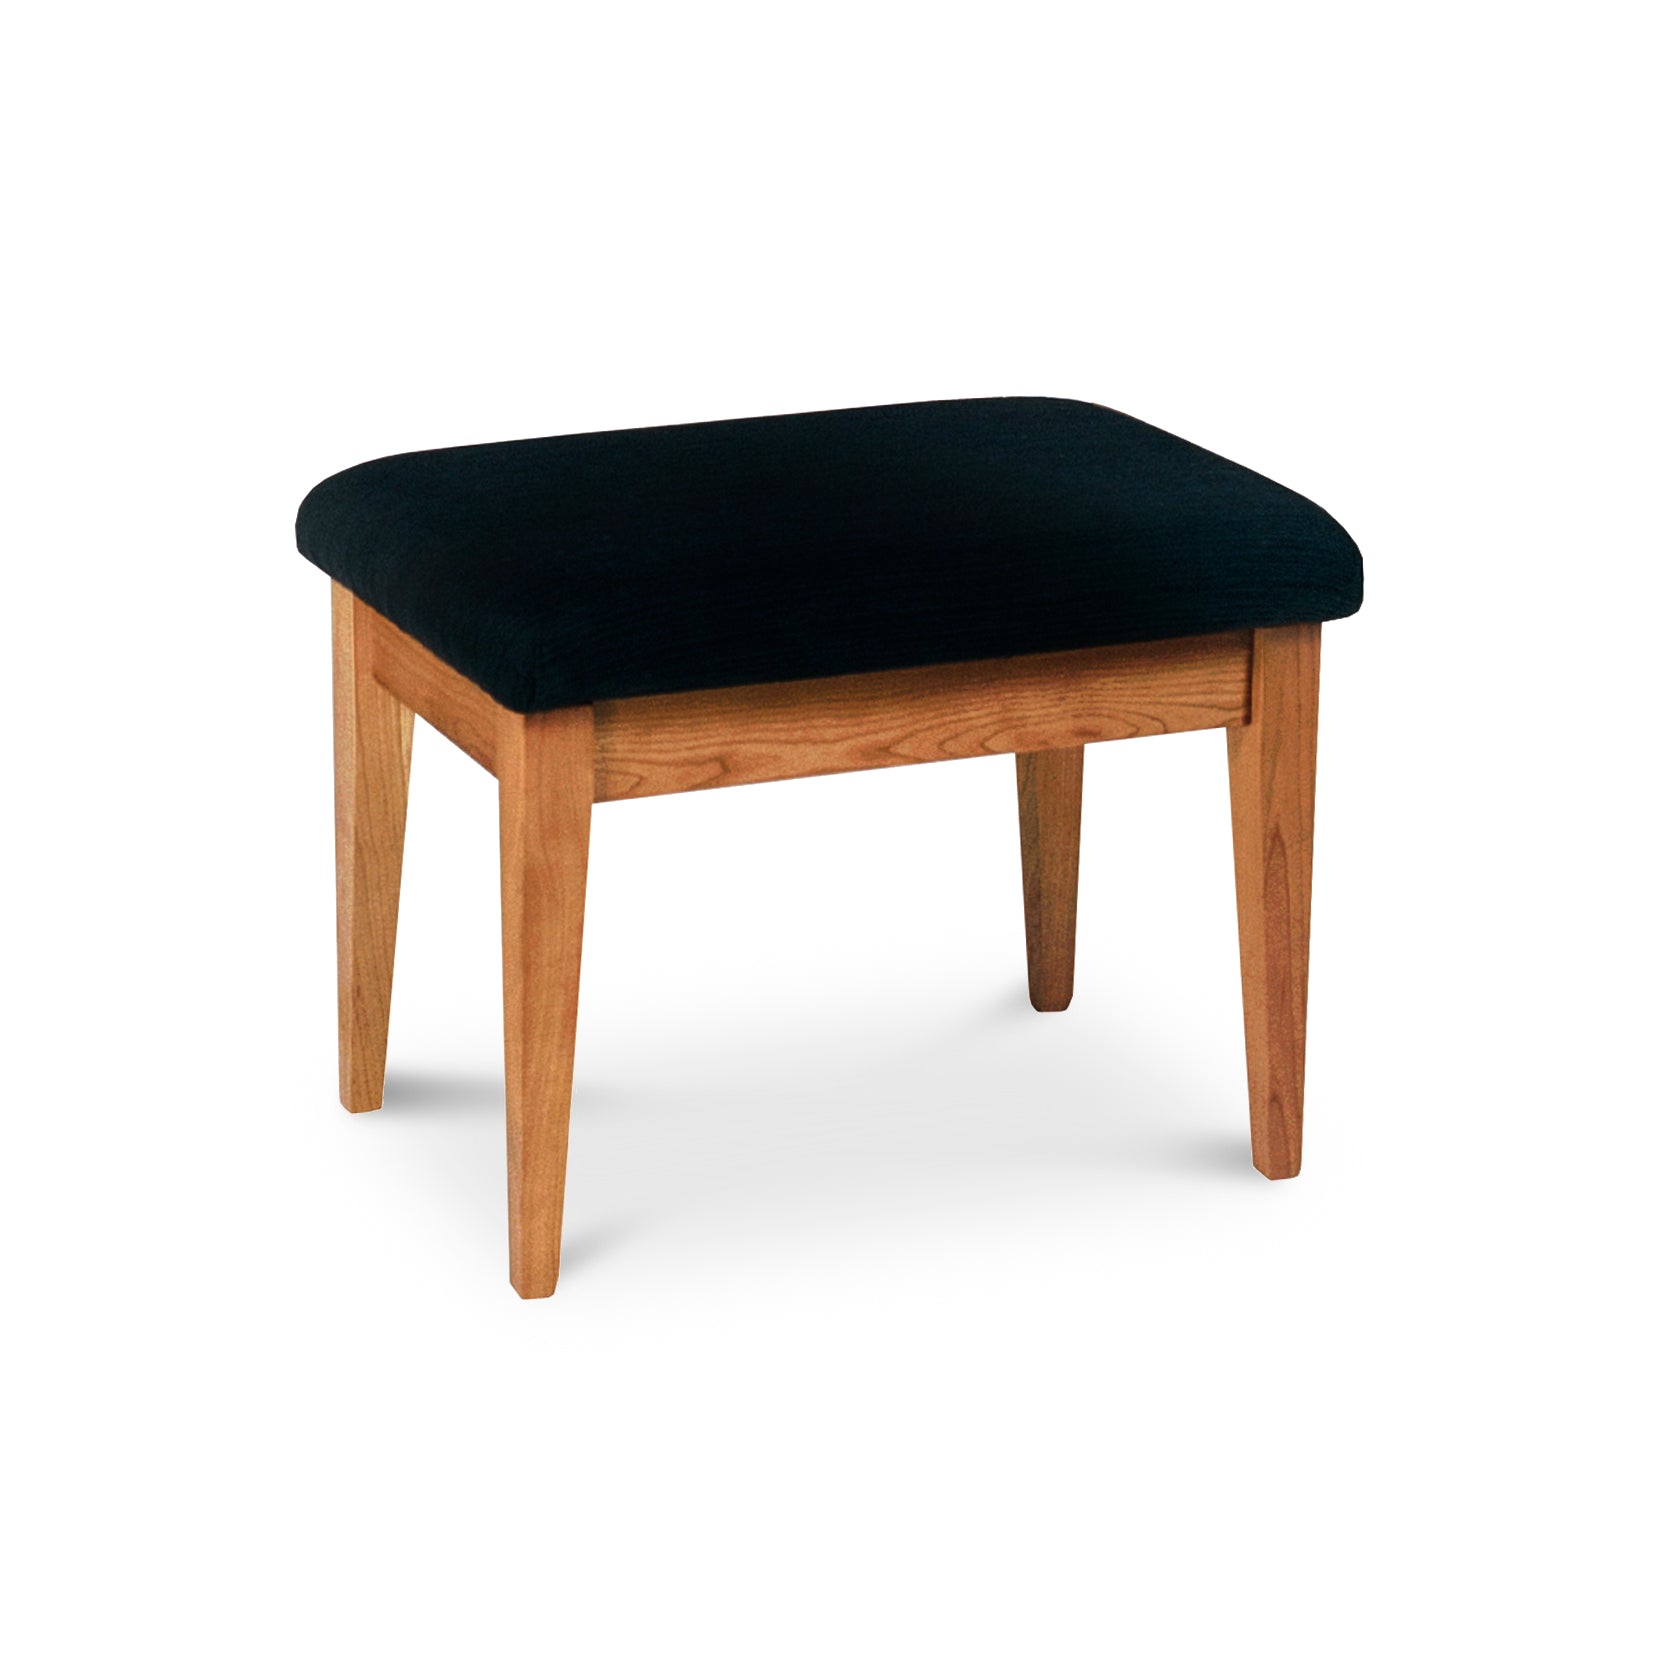 A New England Shaker Dressing Stool by Lyndon Furniture, with a black upholstered seat, sustainably harvested wood.